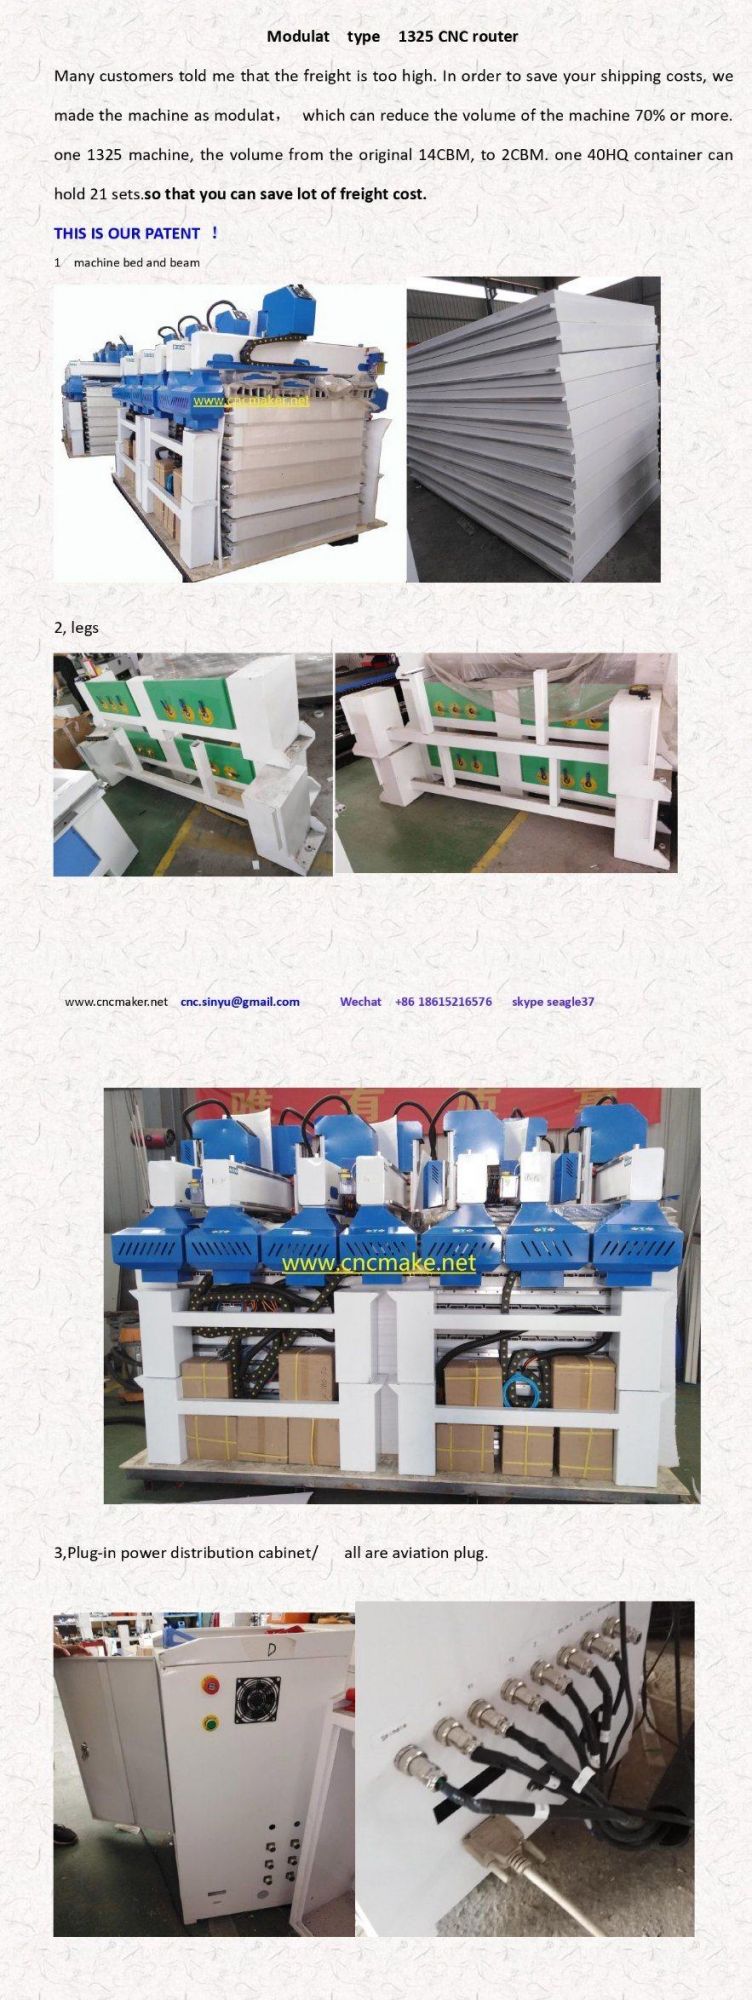 Wood CNC Router Atc/Woodworking Machinery/China Linear Atc CNC Router1530cworking Table Size (mm) 1300X2500